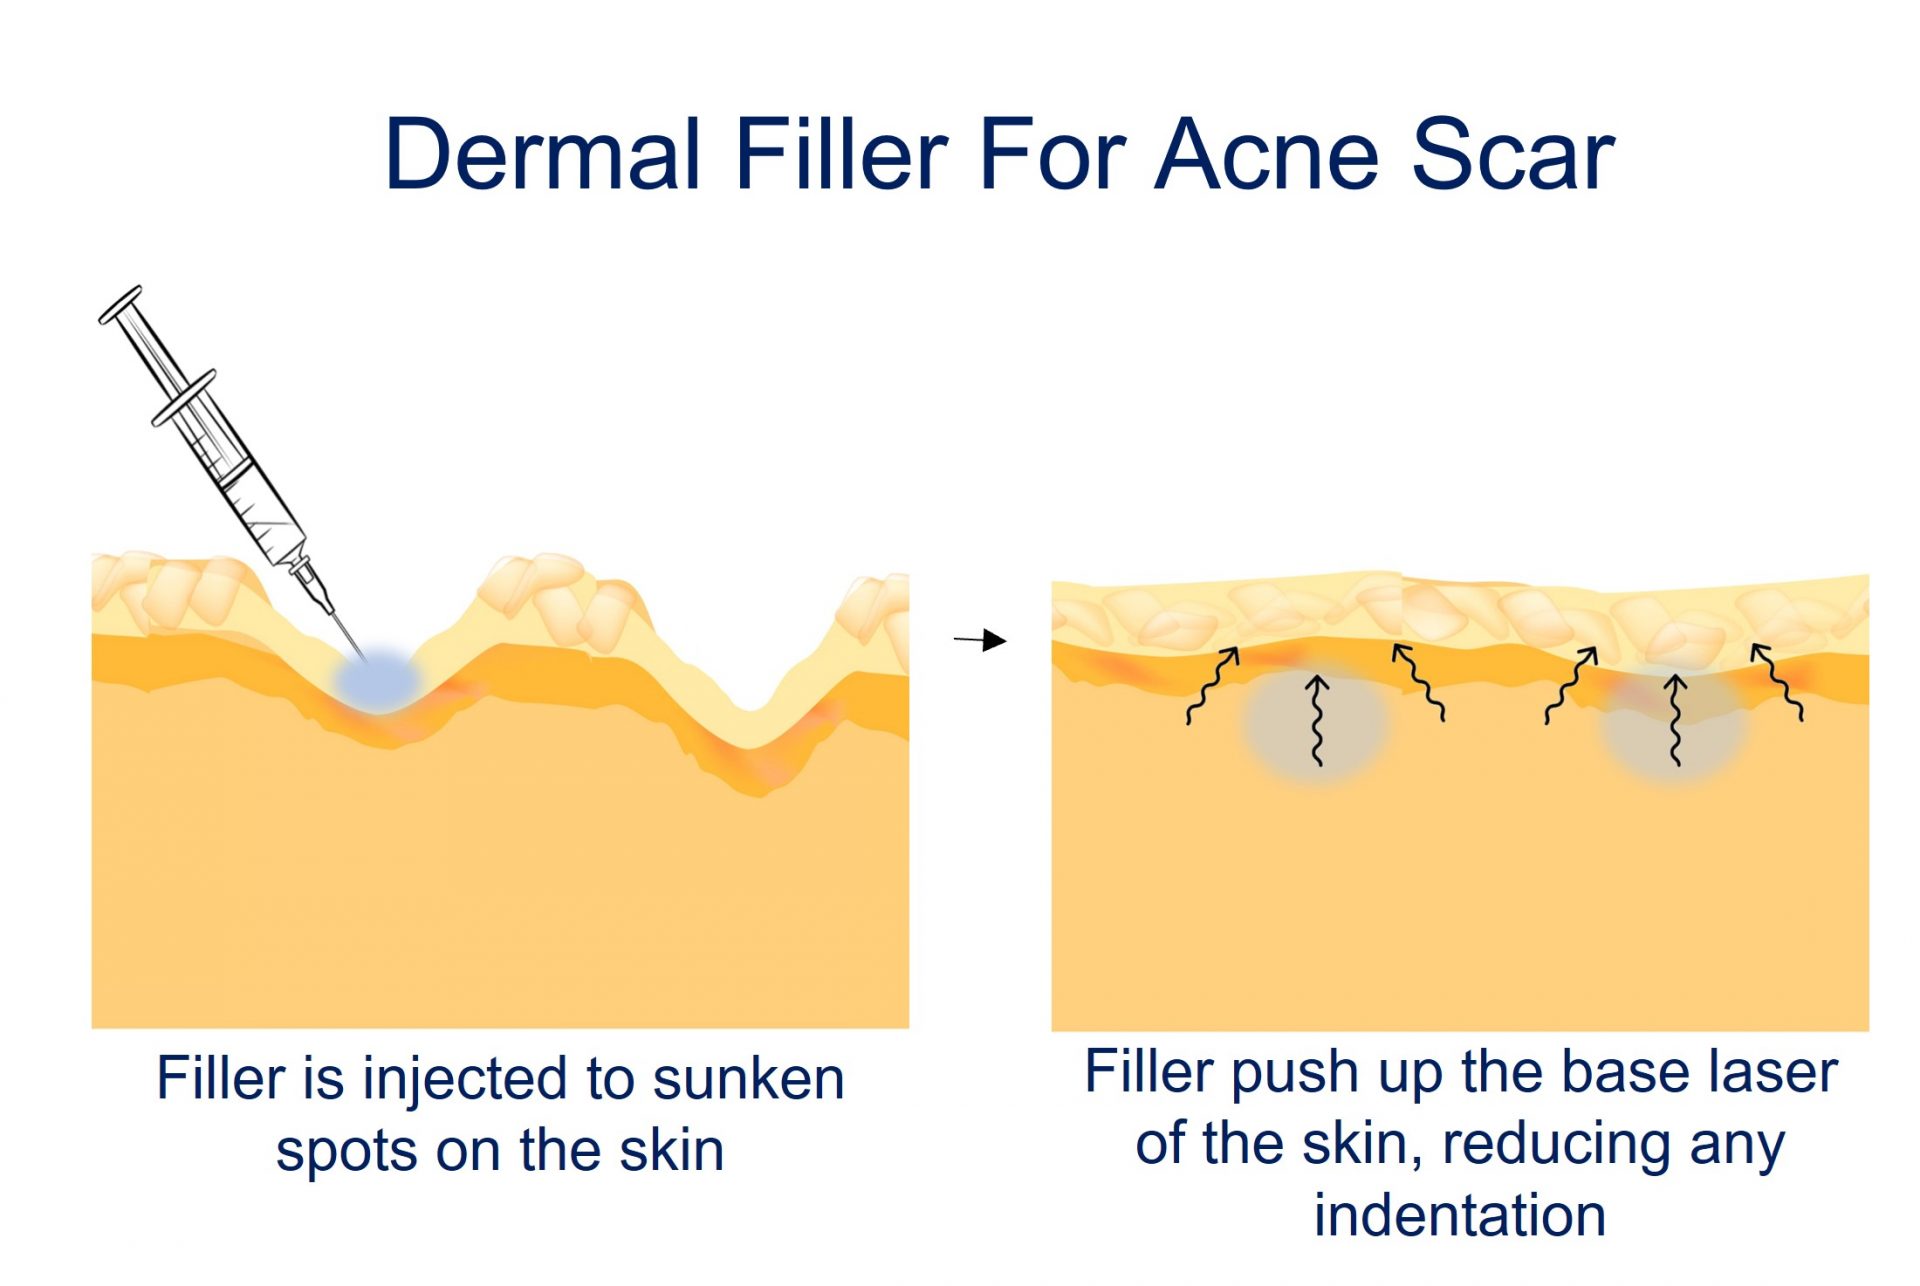 dermal fillers for acne scar - how it works